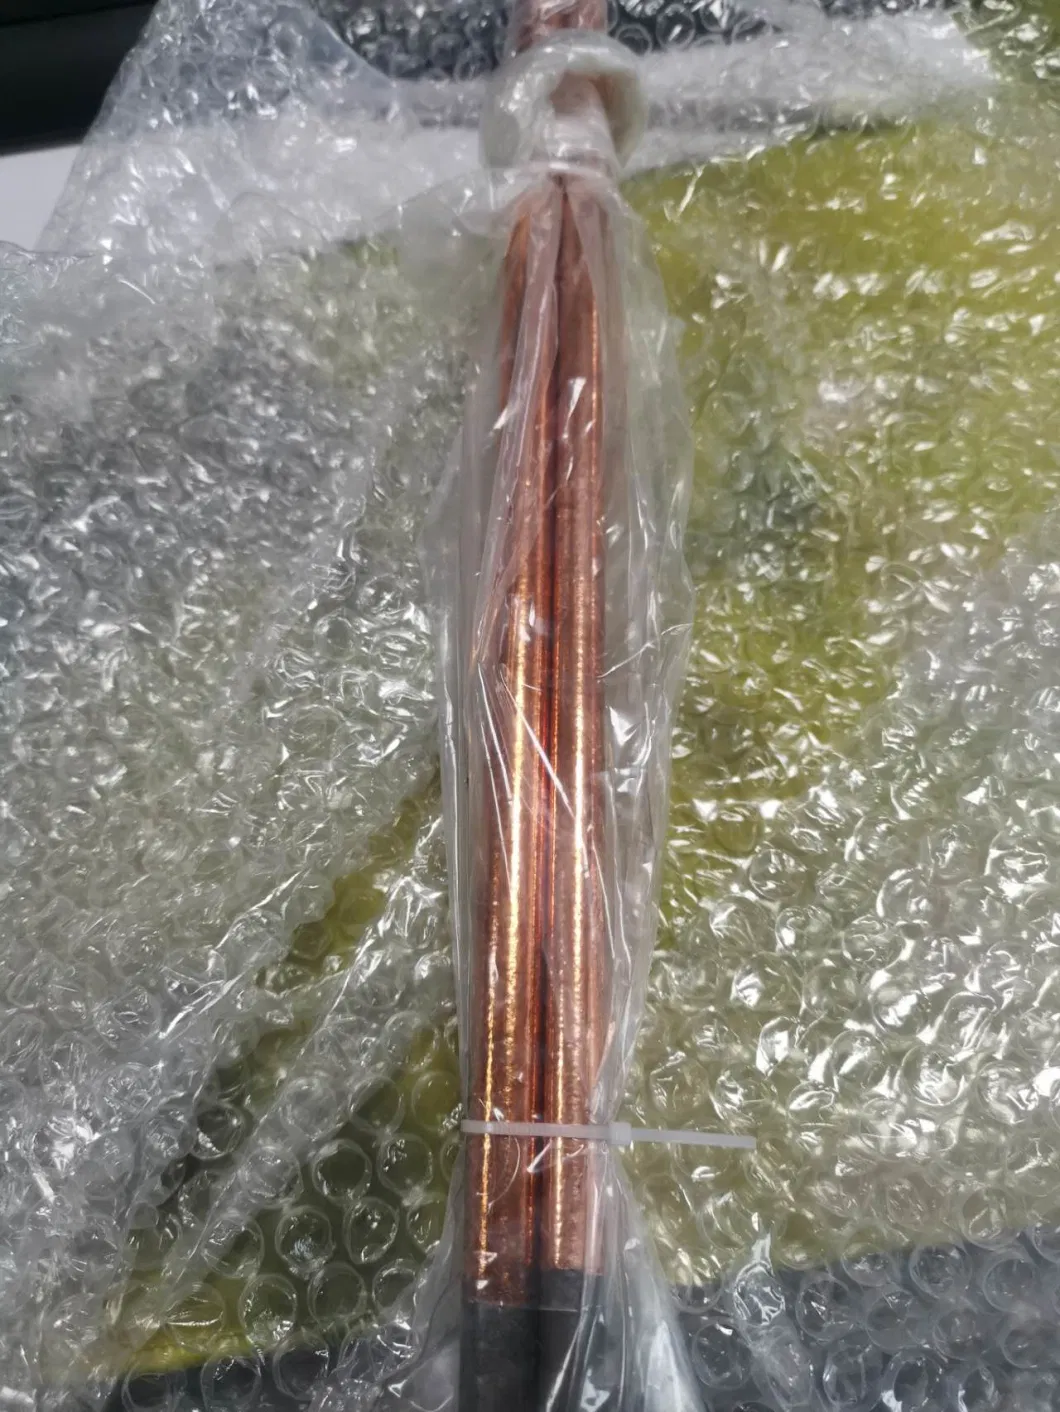 Copper Clad Pointed Arc Gouging Rods 4mm, 6mm, 8mm, 10mm, 12mm, 13mm, 15mm, 17mm, 16mm, 19mm 20mm...High and Direct Current